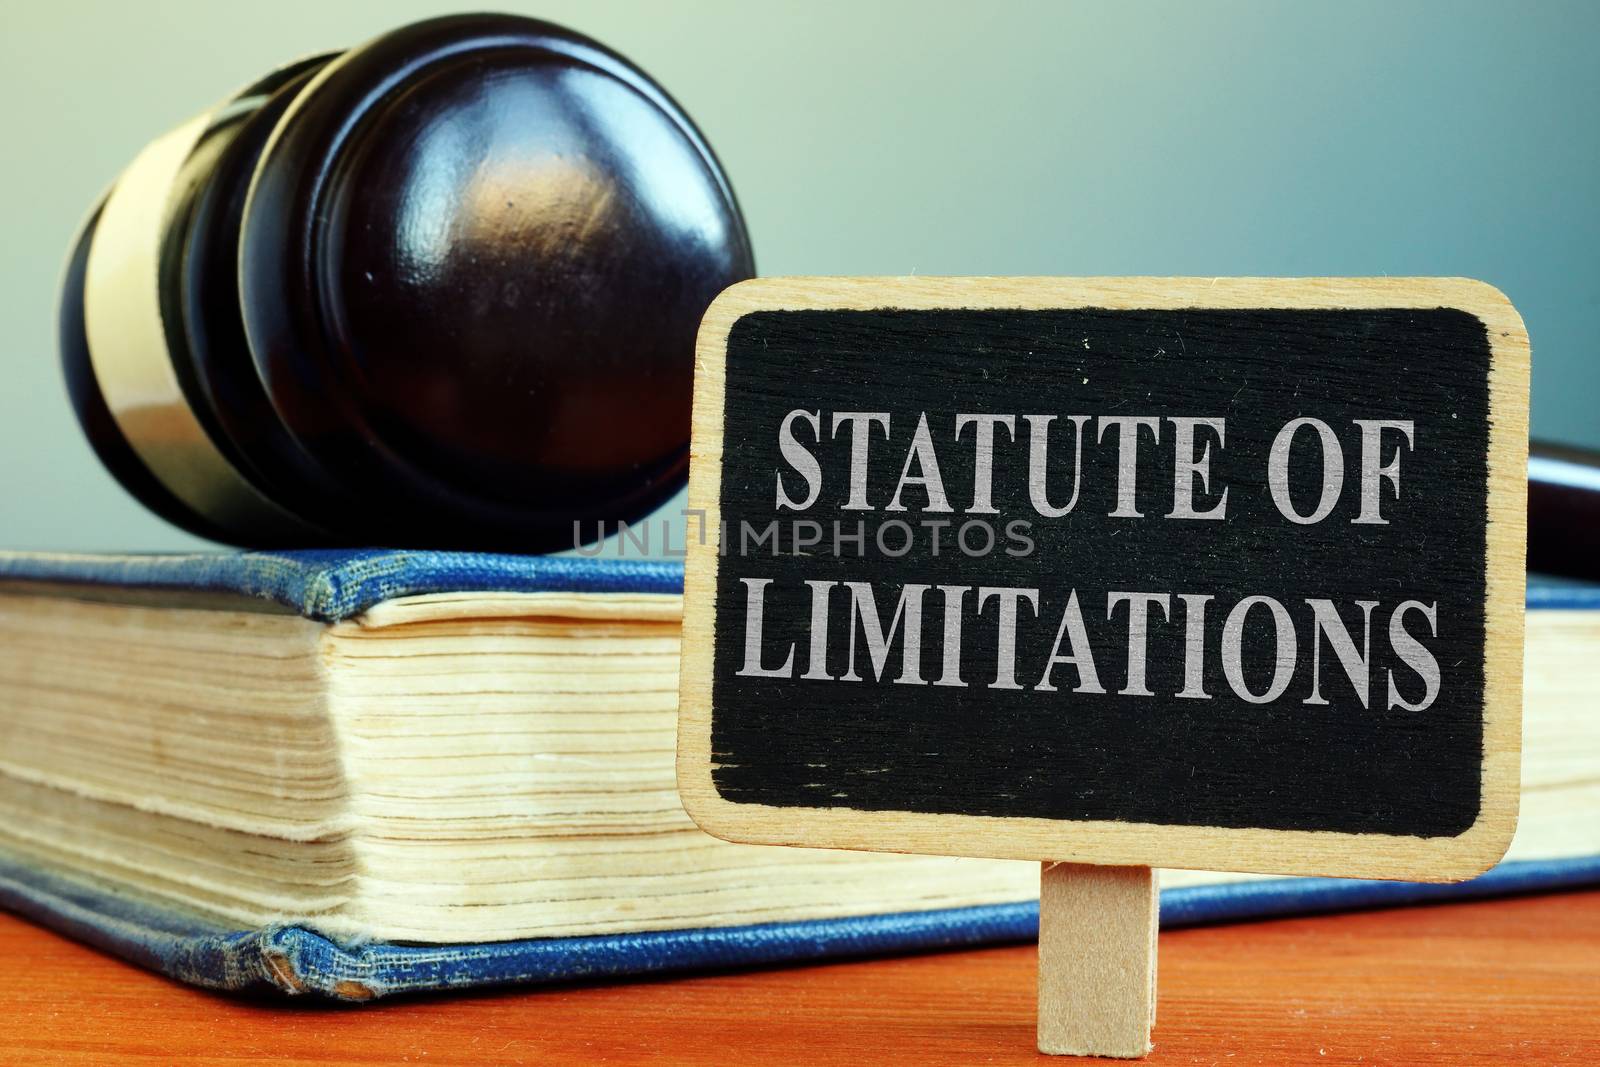 Statute of limitations sign, book and gavel.